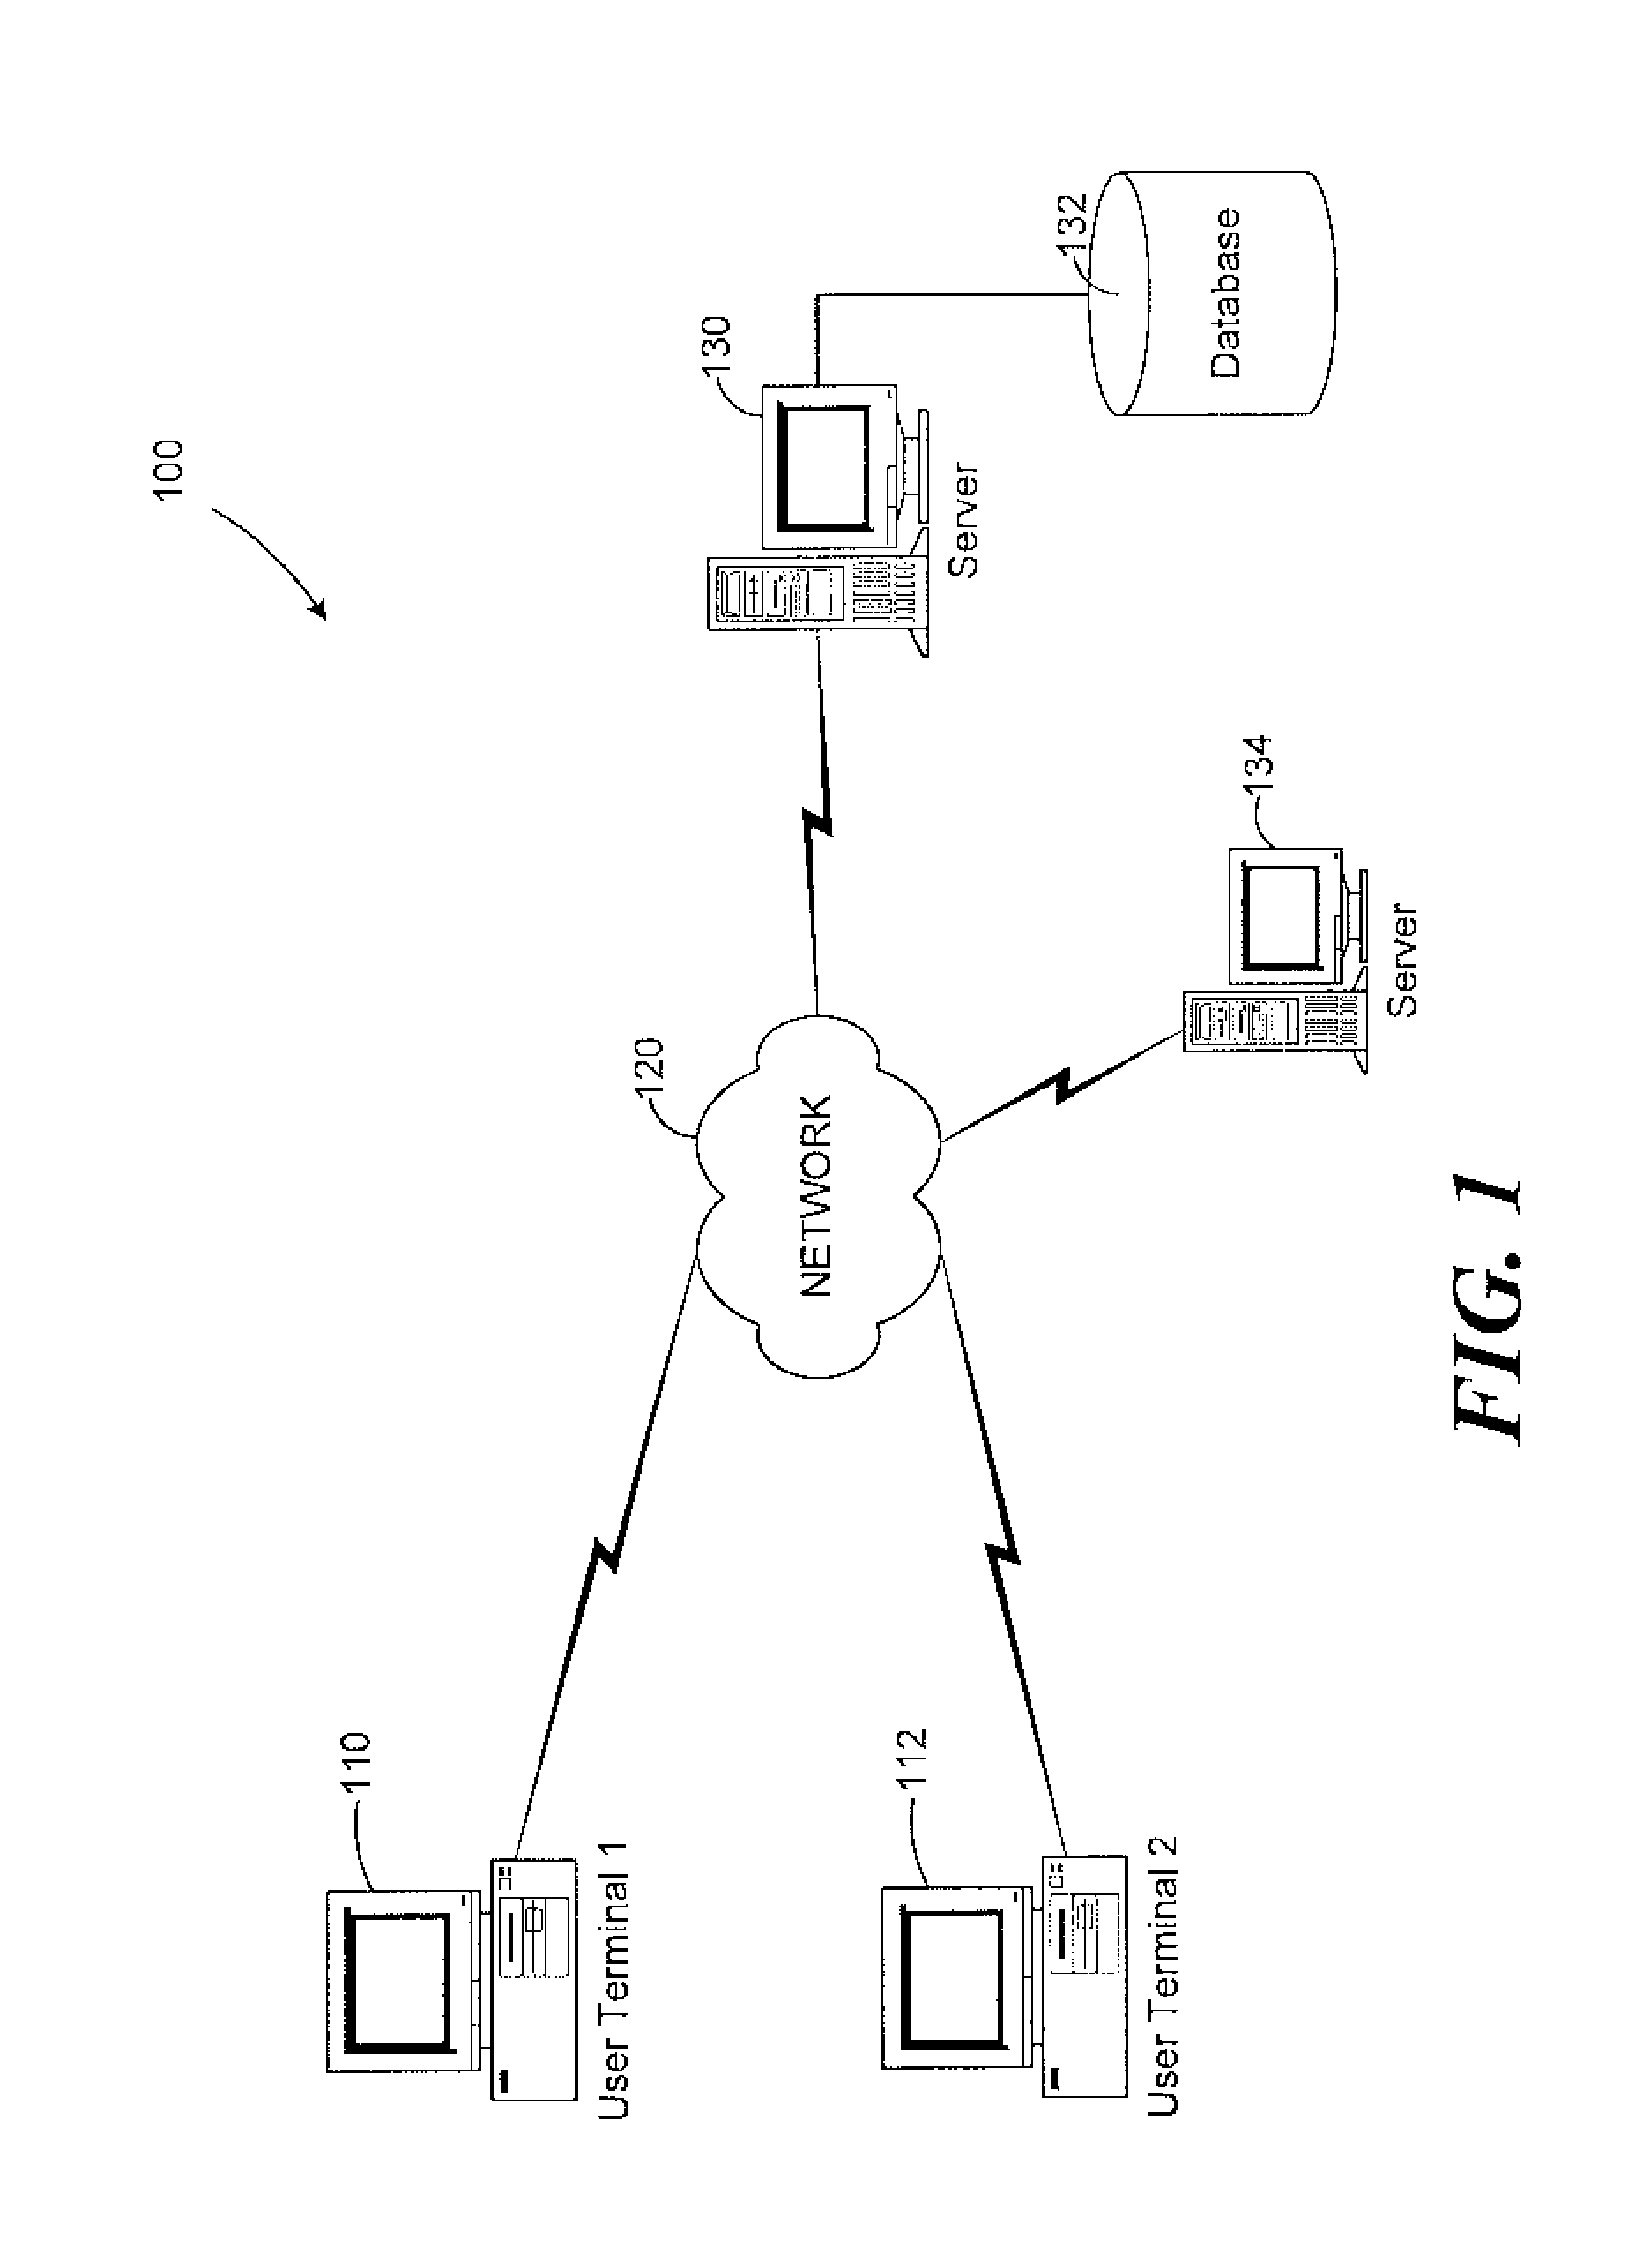 Method and system for maintaining cognitive abilities